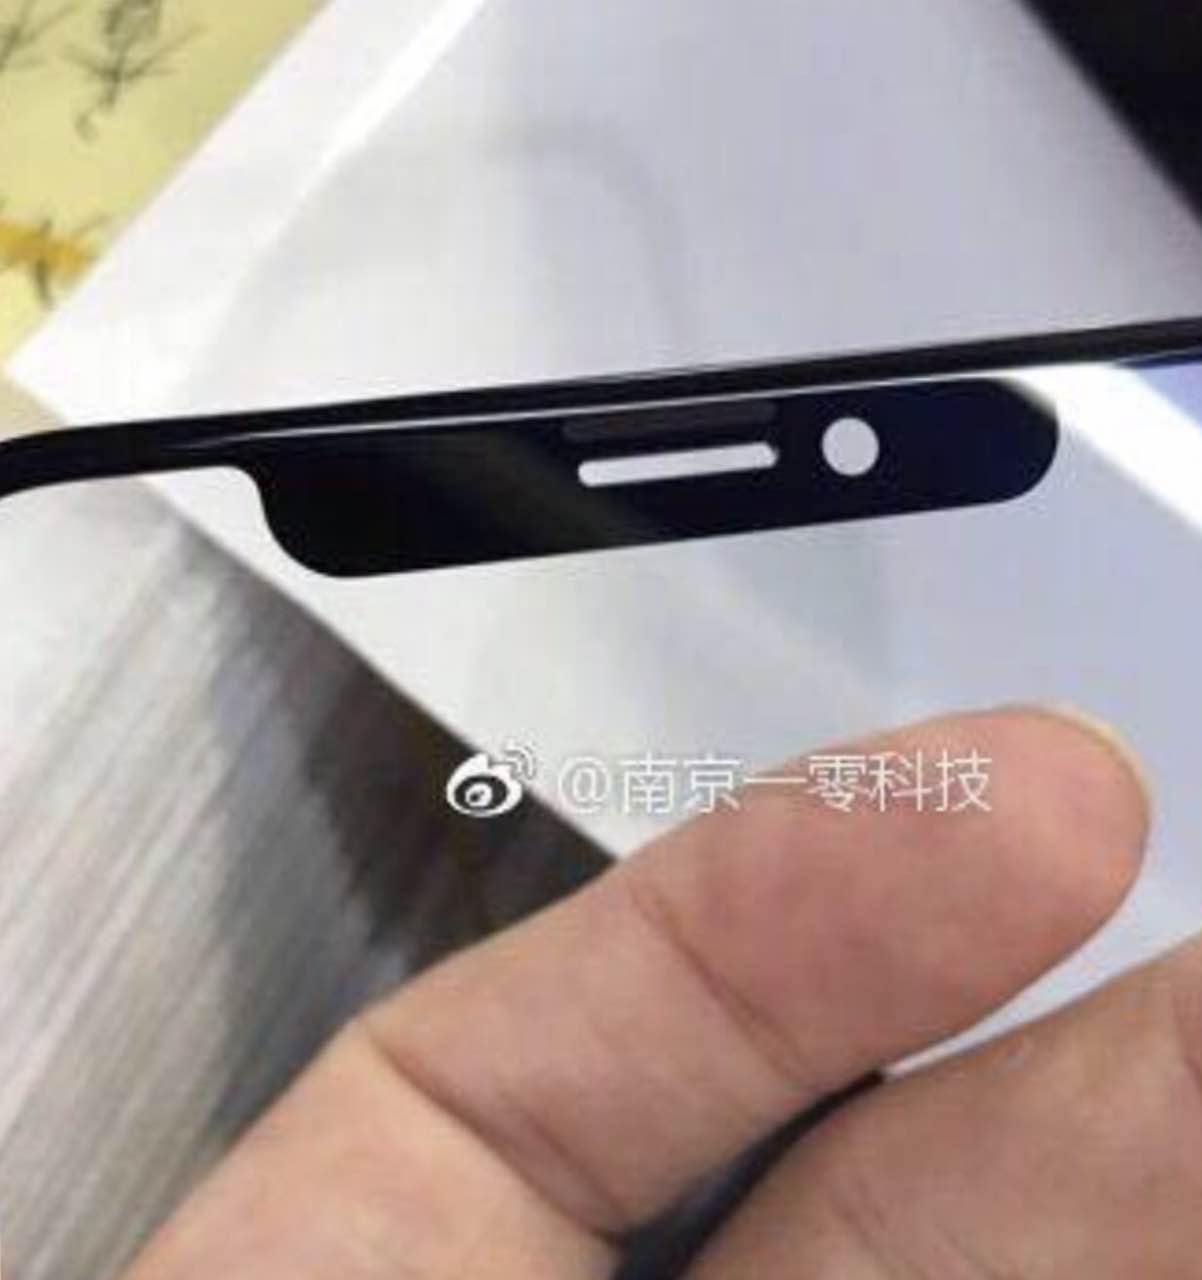 Alleged iPhone 8 Front Glass [Photos]